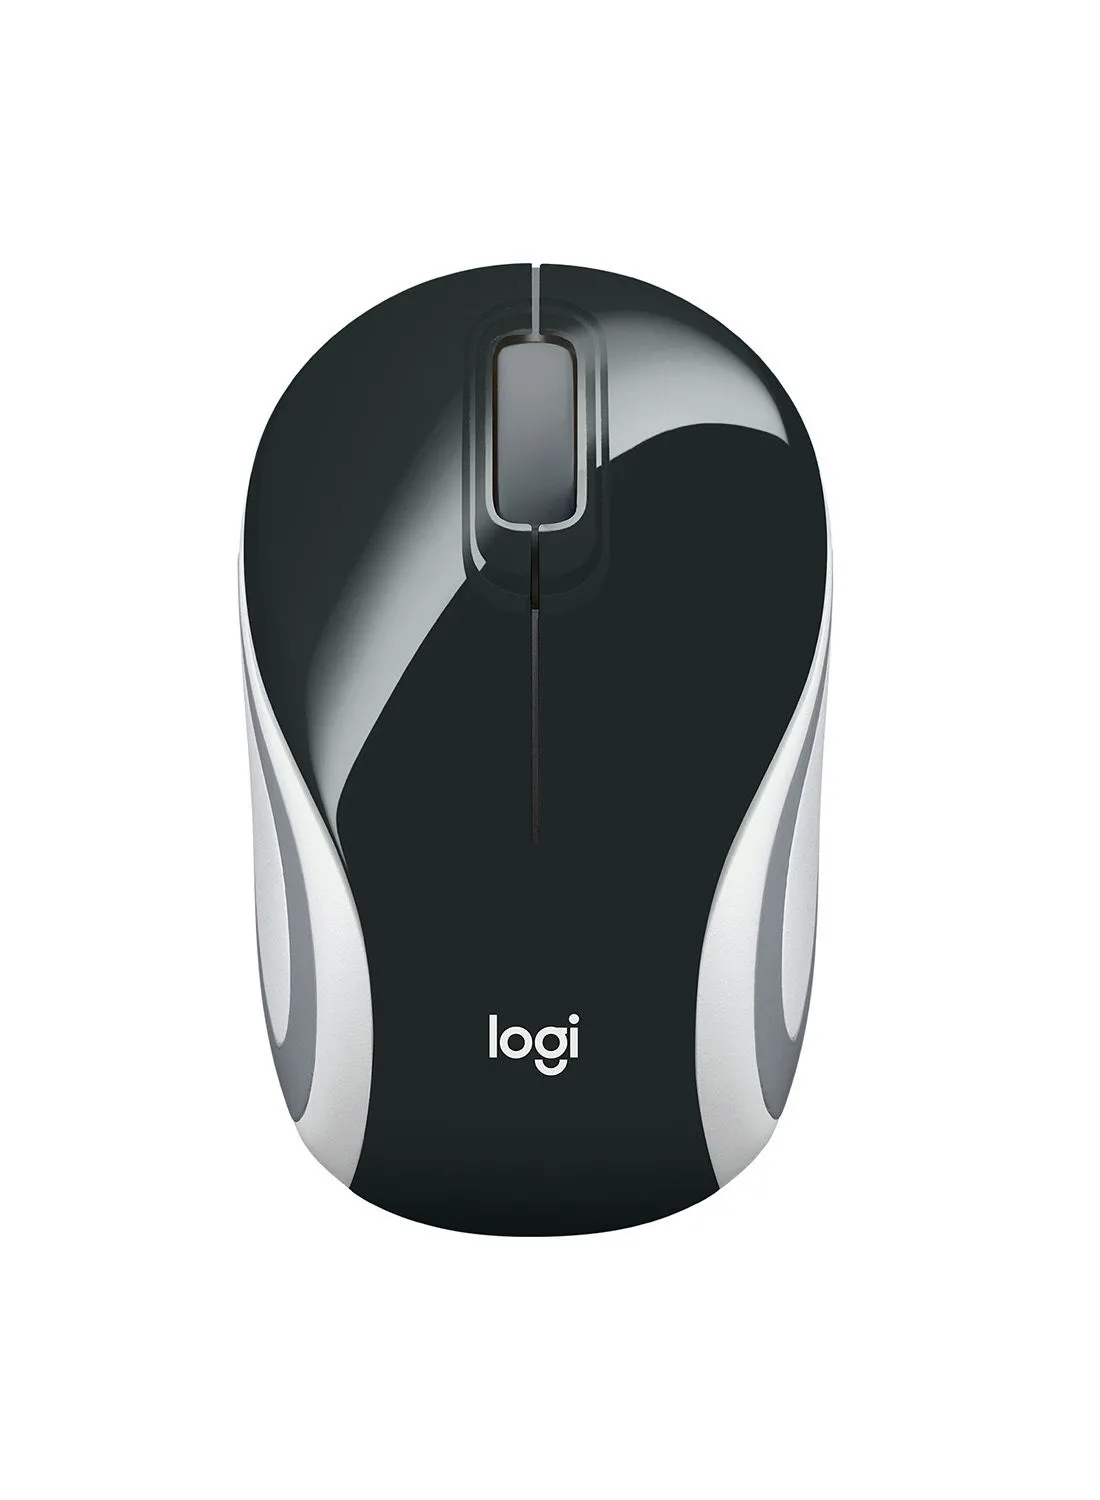 Logitech M187 Ultra Portable Wireless Mouse, 2.4 GHz With USB Receiver, 1000 DPI Optical Tracking, 3-Buttons, PC / Mac / Laptop Black 